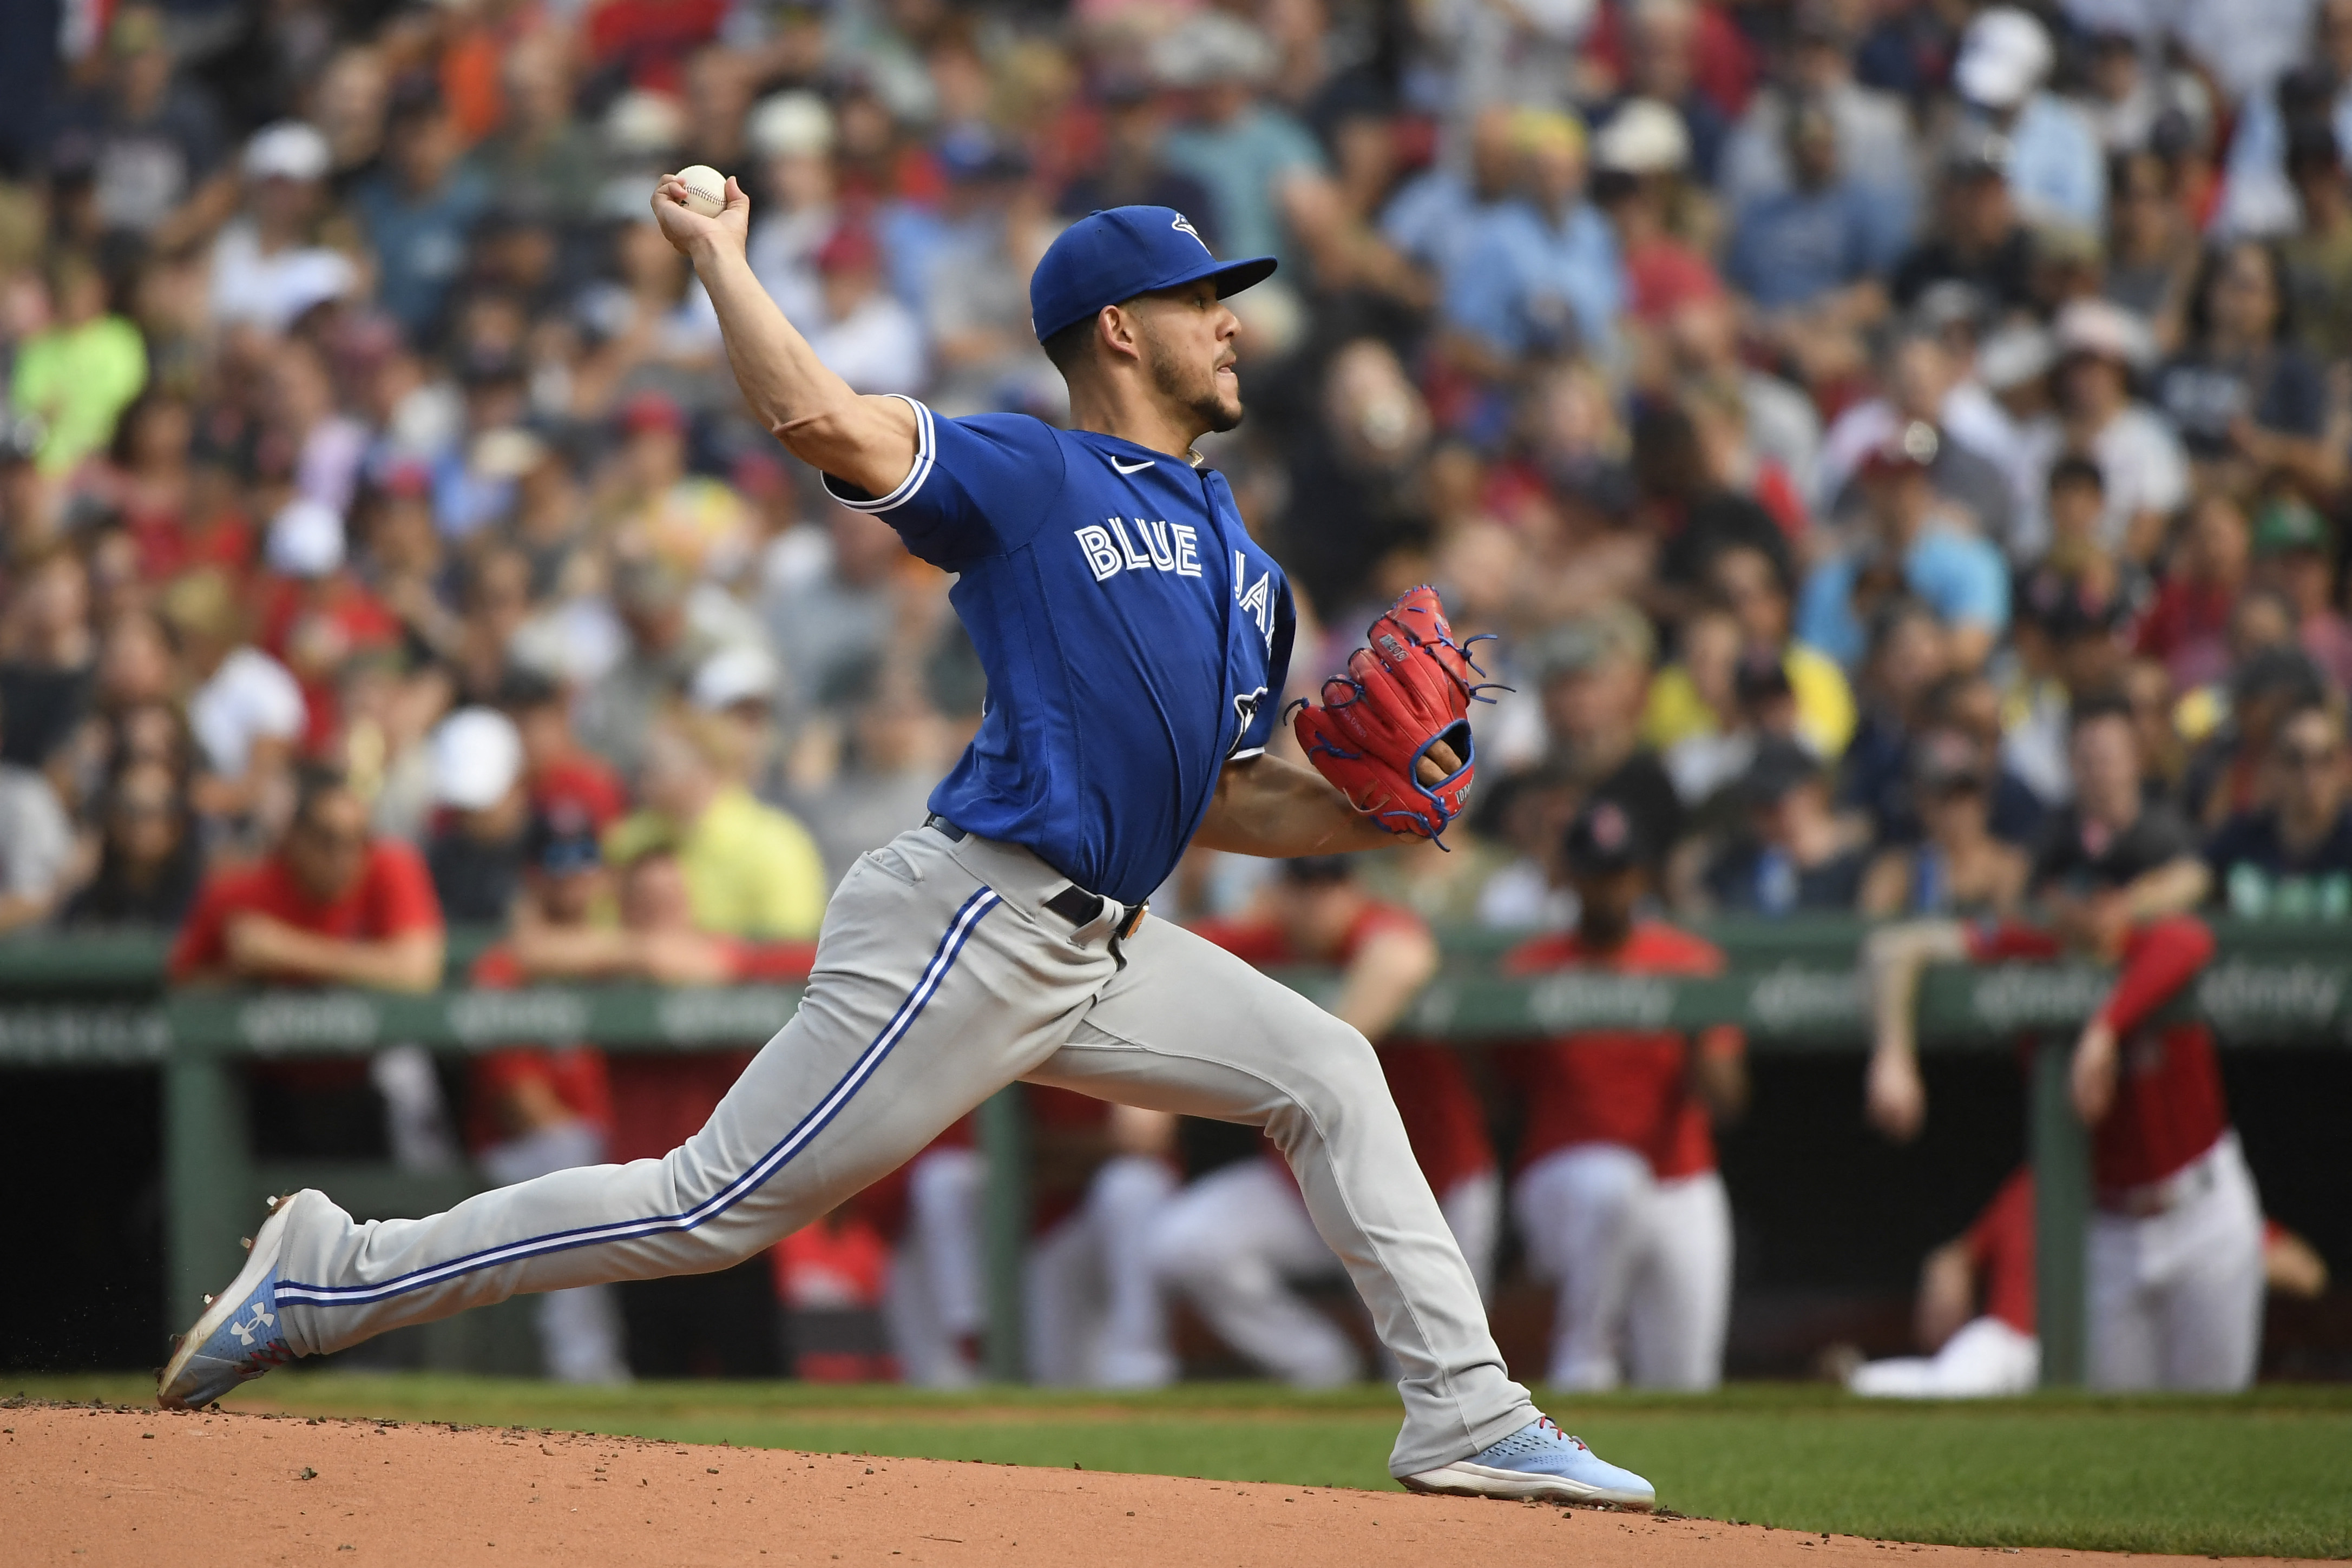 Blue Jays catcher Danny Jansen late scratch against Red Sox due to